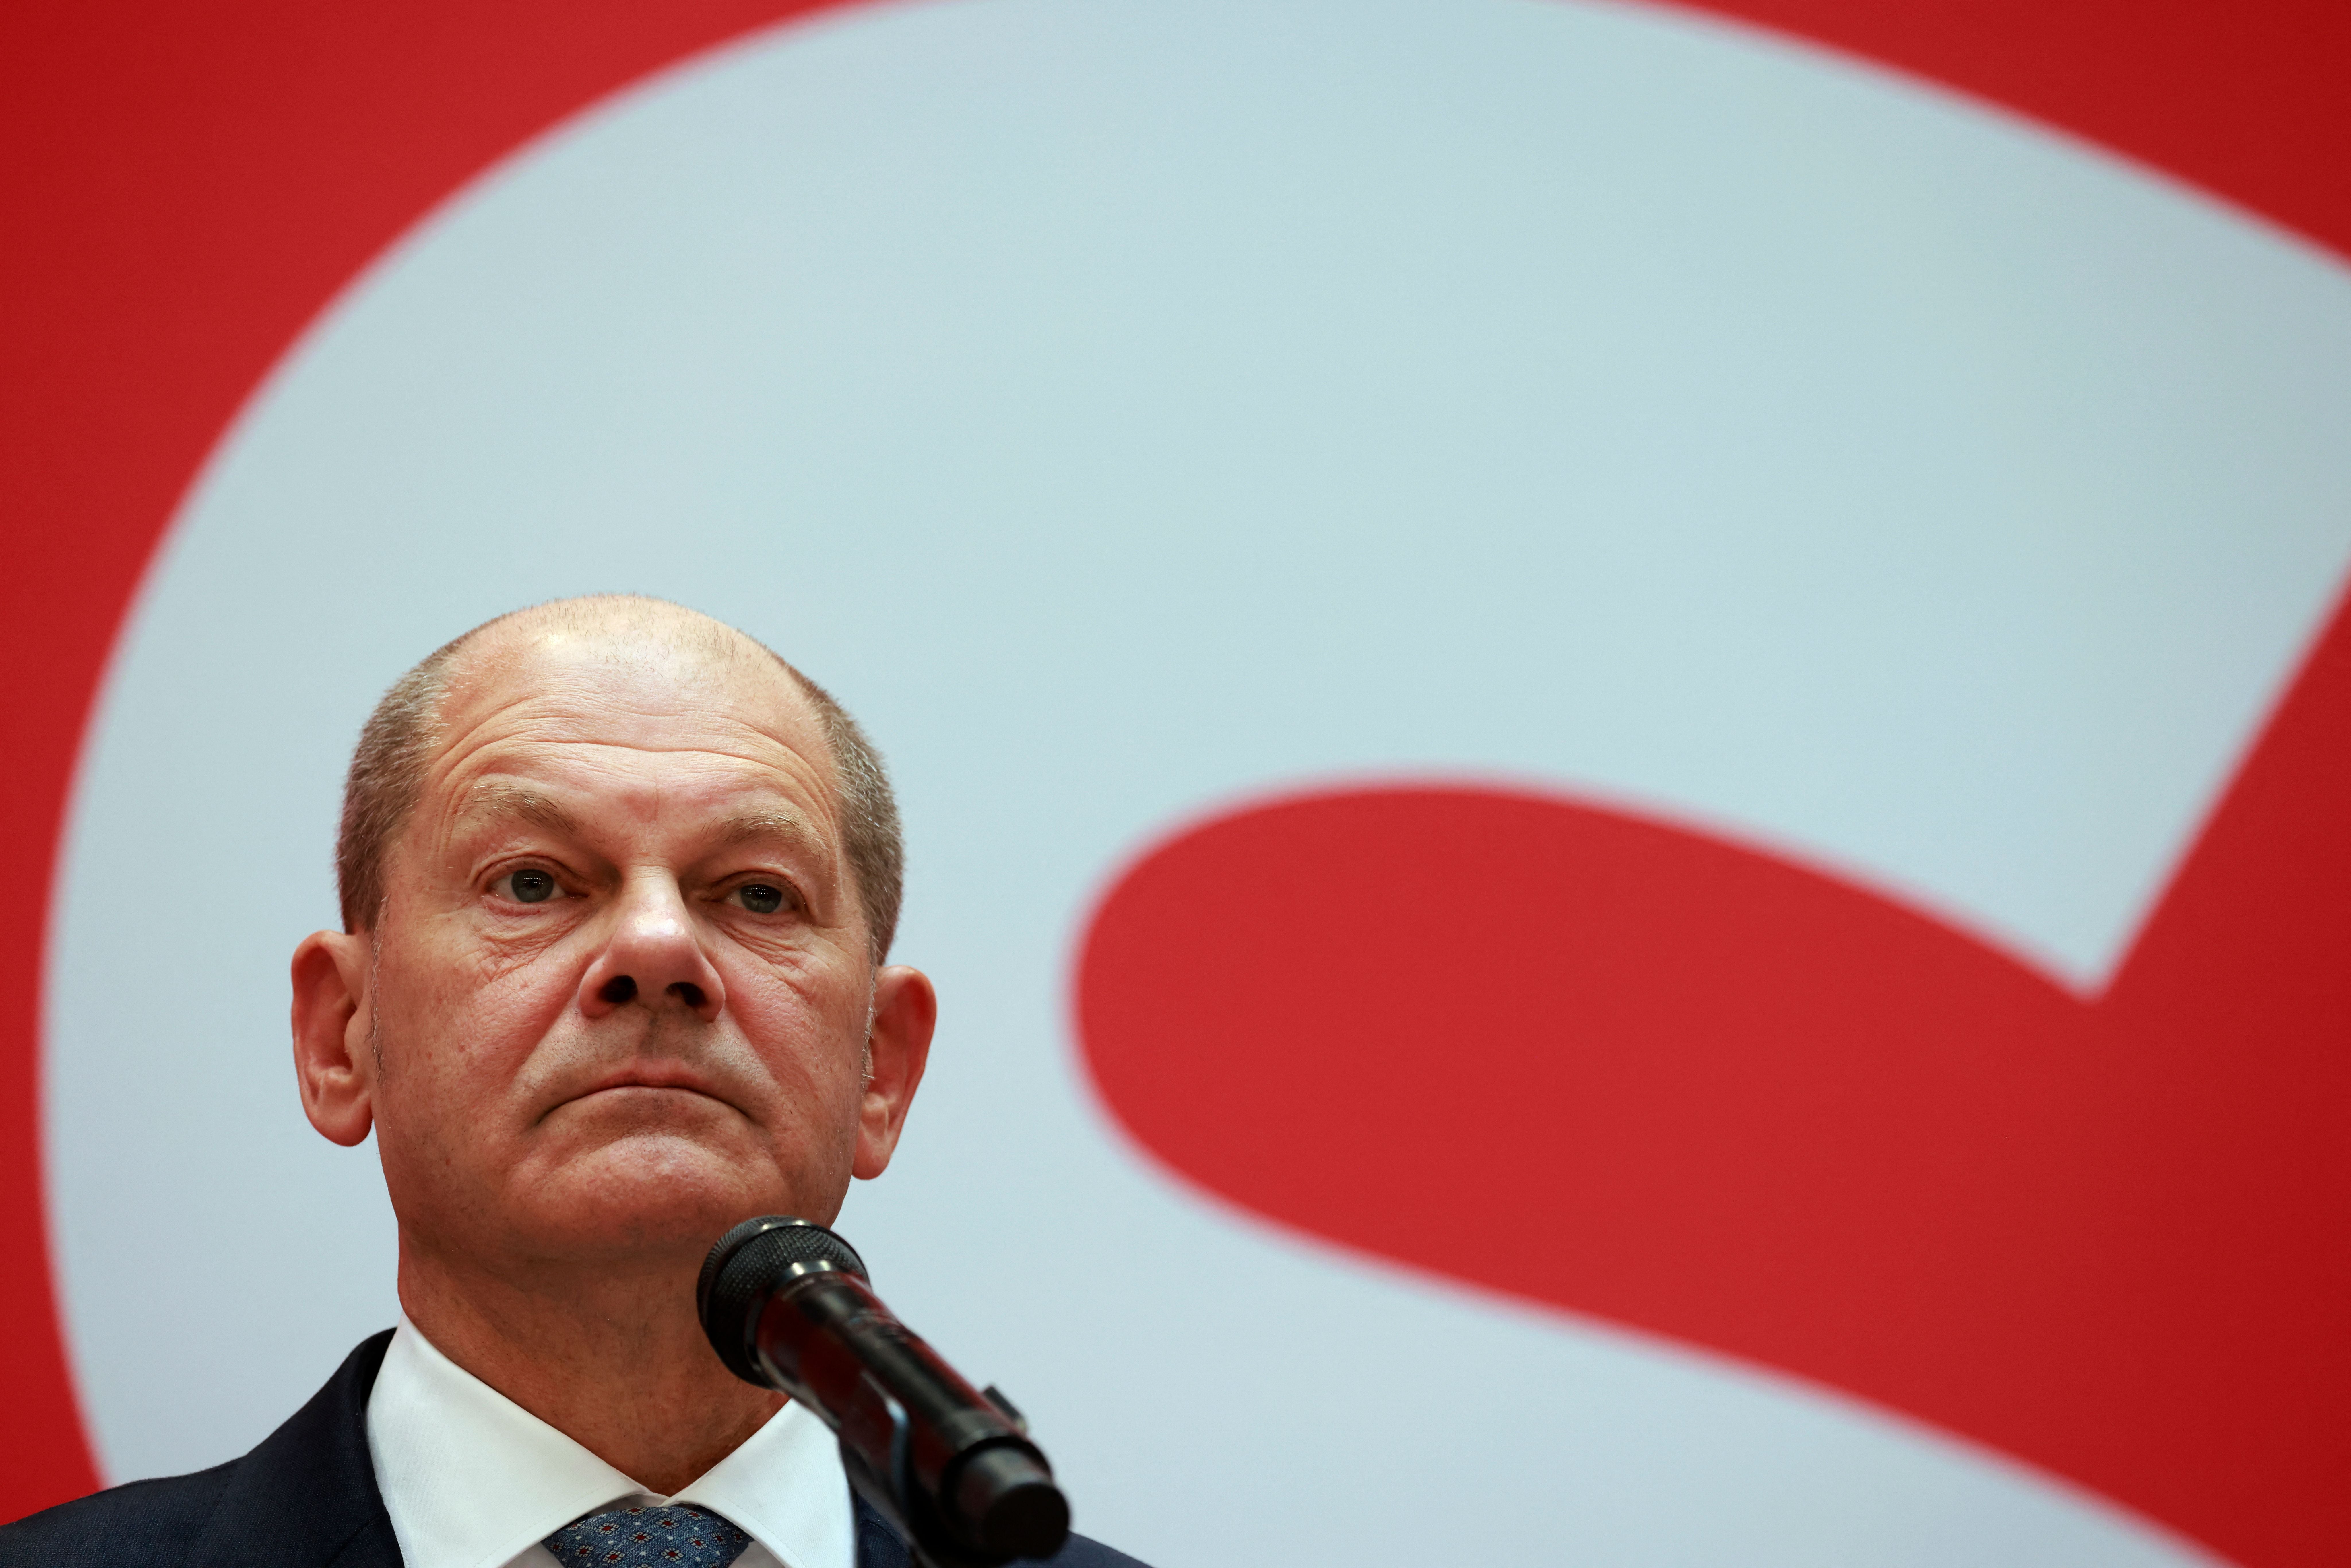 A Scholz-led coalition could take Germany in a more socially progressive direction